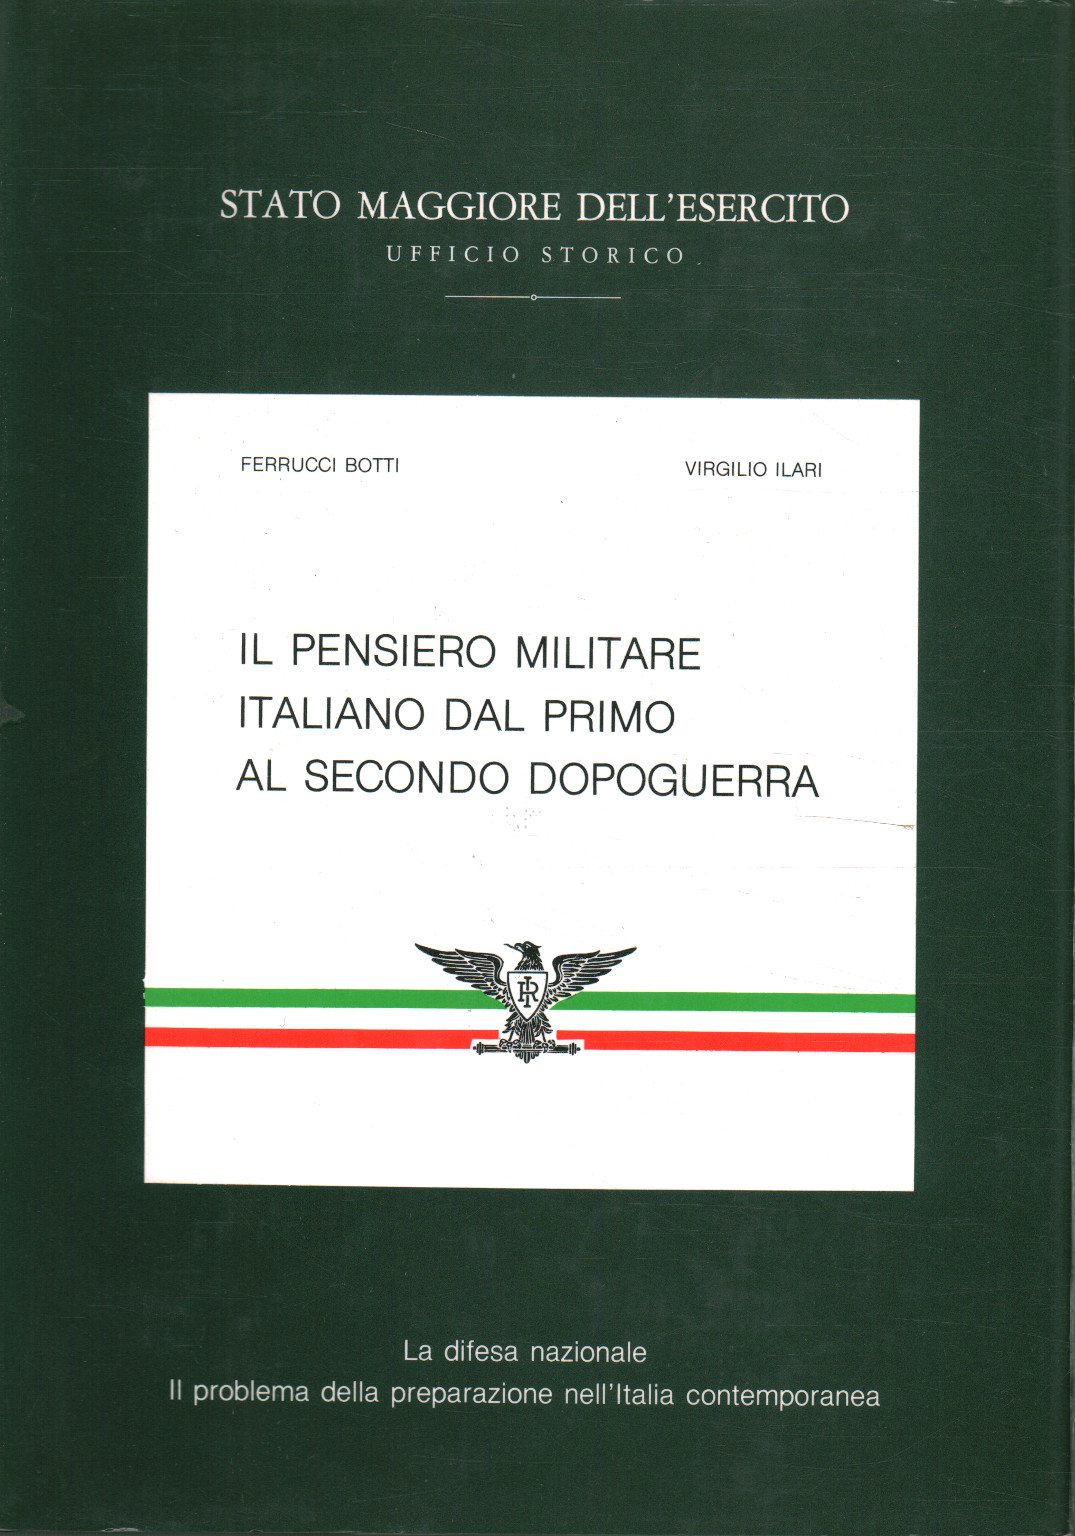 The Italian military thought from the first%, The Italian military thought from the first%, The Italian military thought from the first%